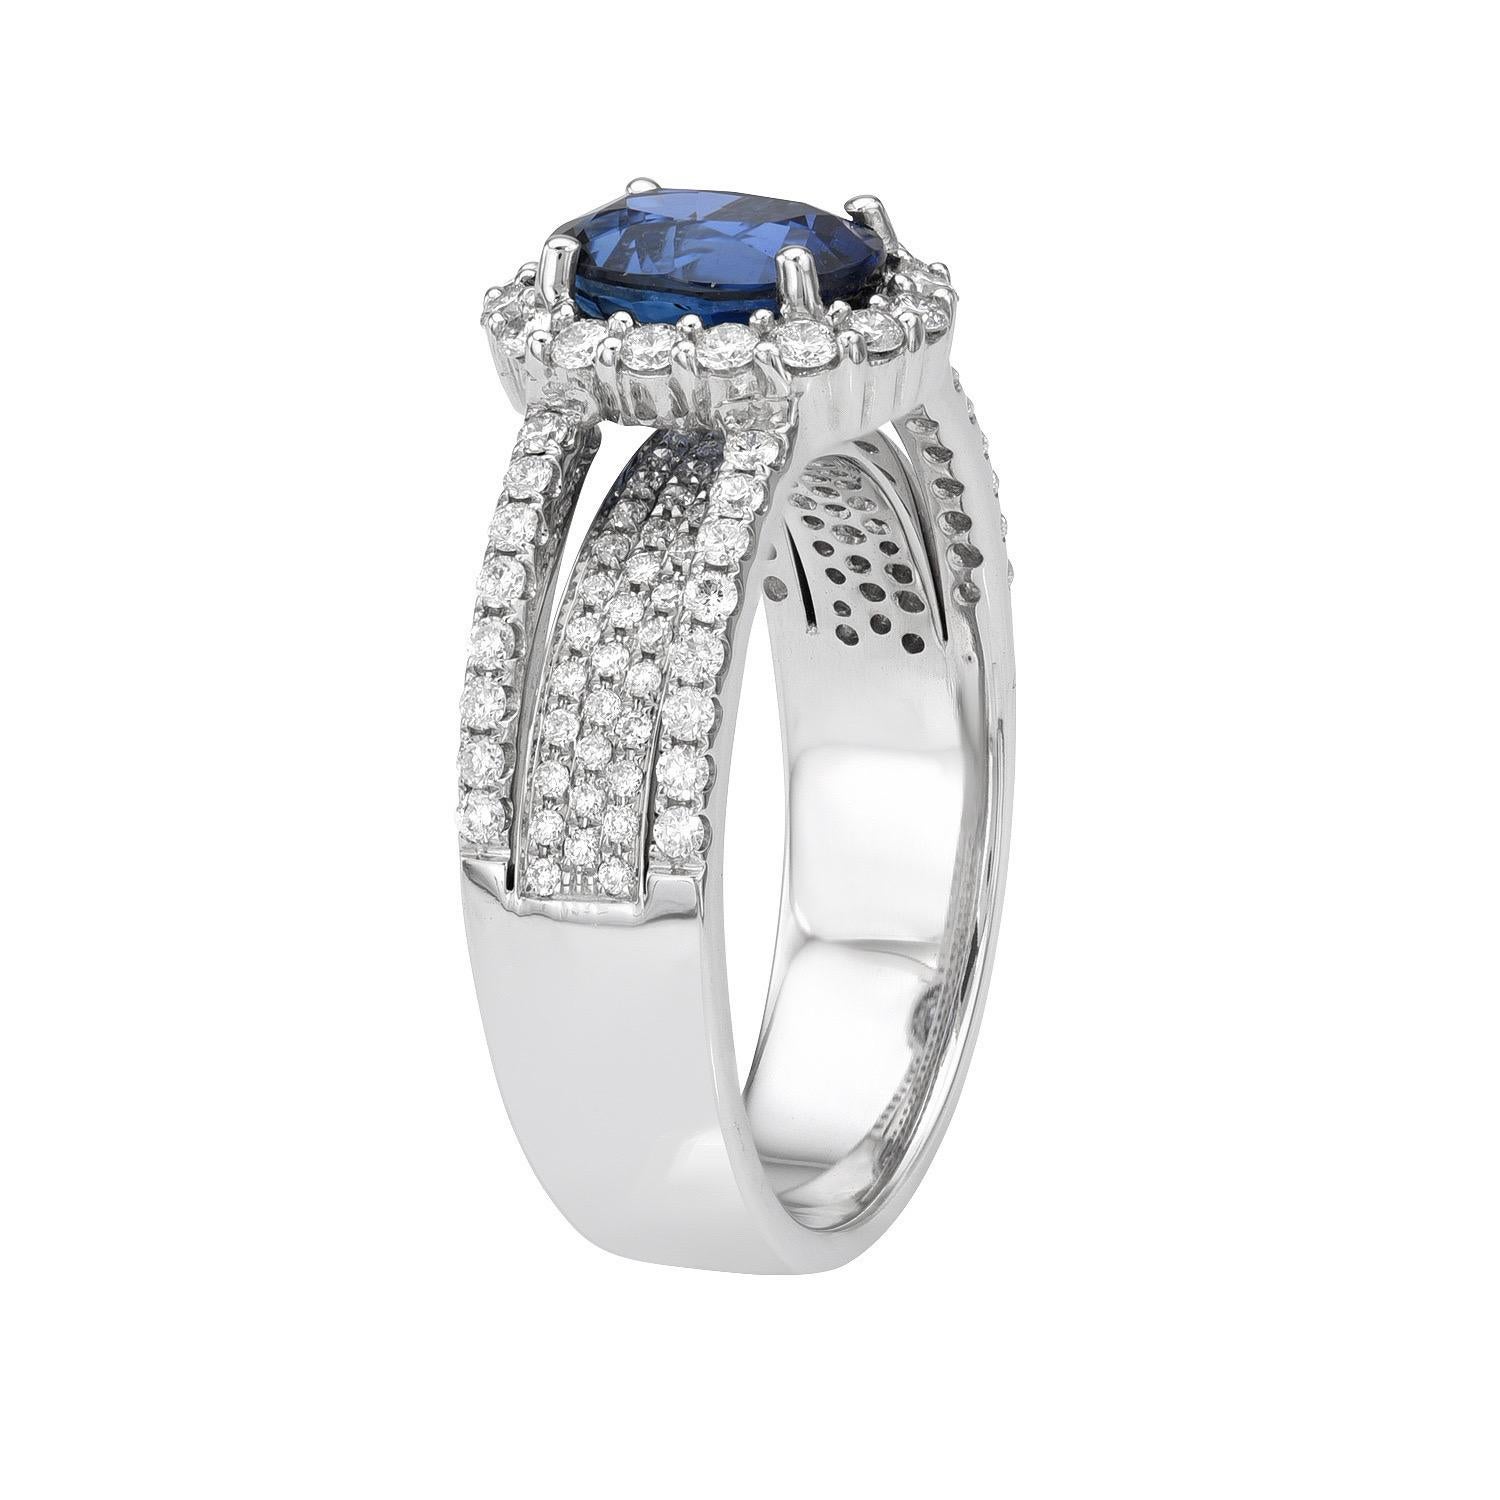 Marvelous 1.48 carat Blue Sapphire cushion 18K white gold ring, decorated with round brilliant diamonds totaling 0.61 carats.
Ring size 6.5. Resizing is complementary upon request.
Returns are accepted and paid by us within 7 days of delivery.